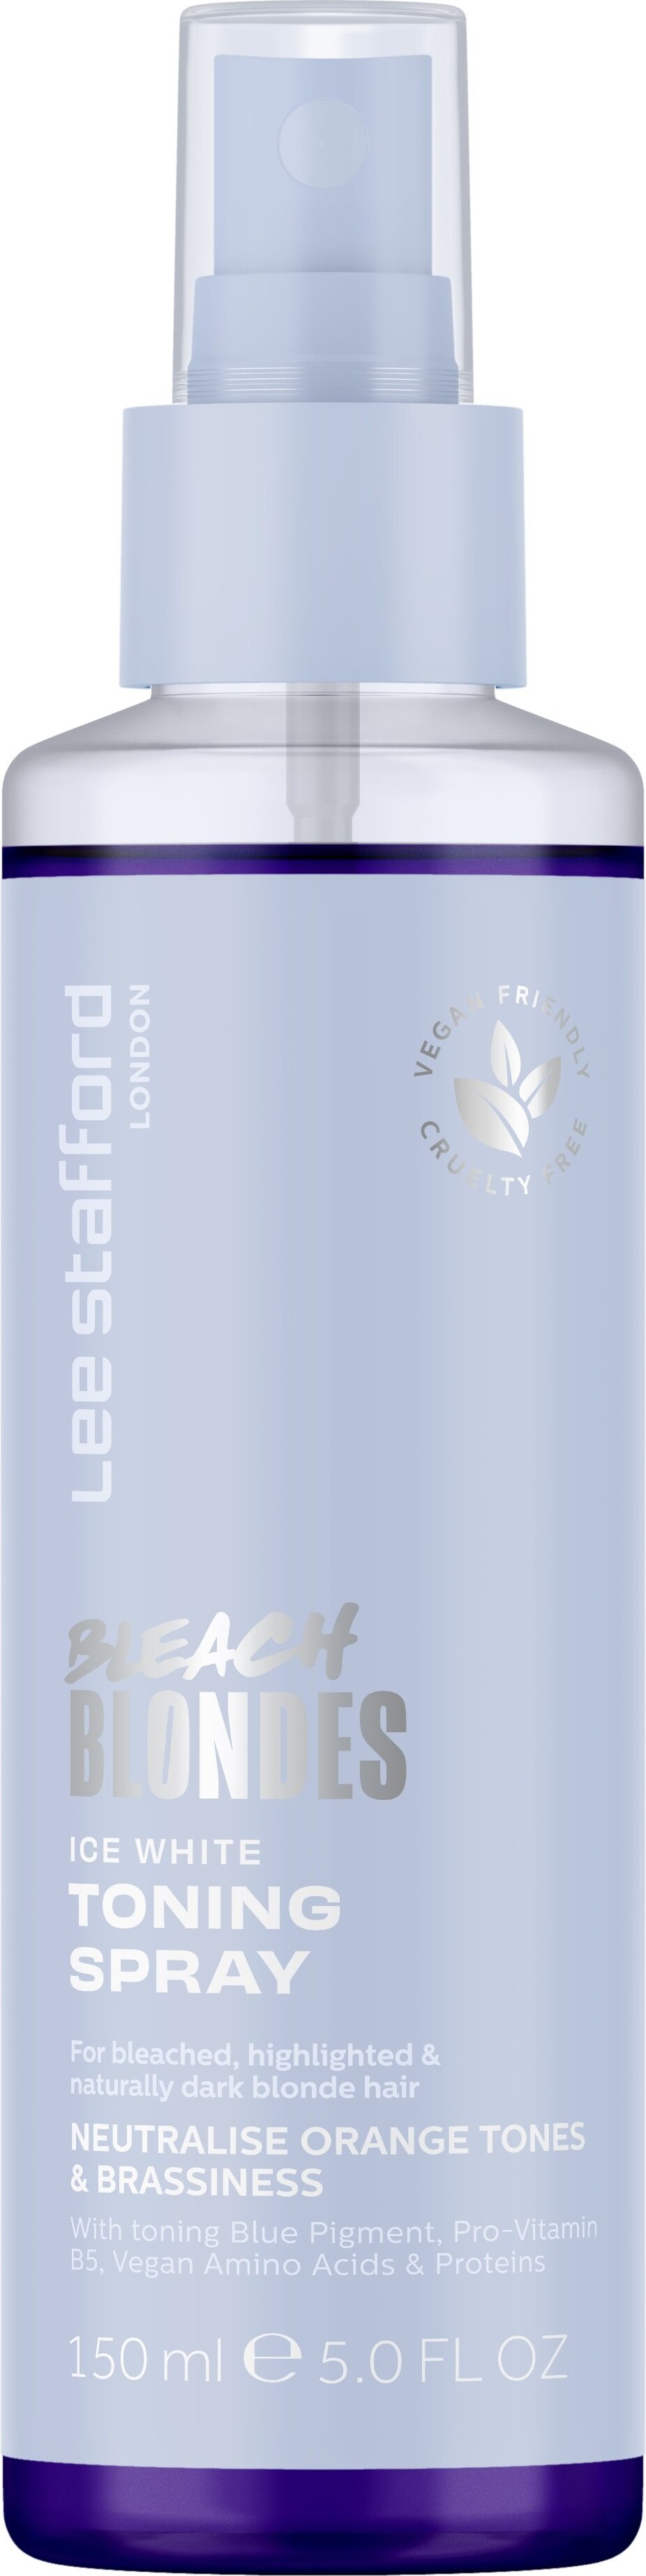 Billede af Lee Stafford - Bleach Blondes Ice White Tone Correcting Conditioning Spray - 150 Ml